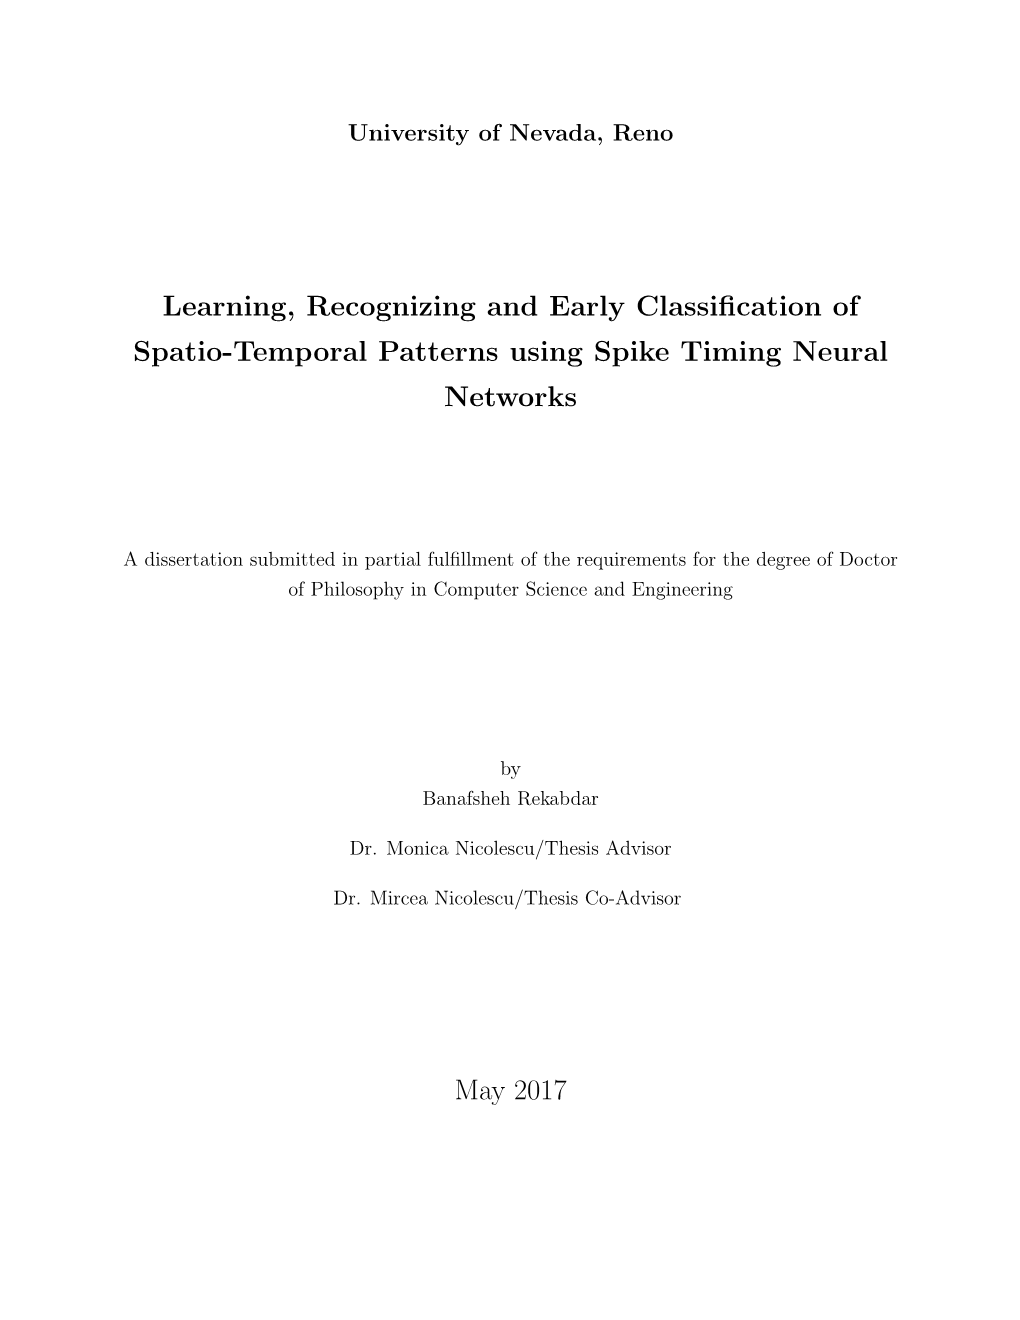 Learning, Recognizing and Early Classification of Spatio-Temporal Patterns Using Spike Timing Neural Networks